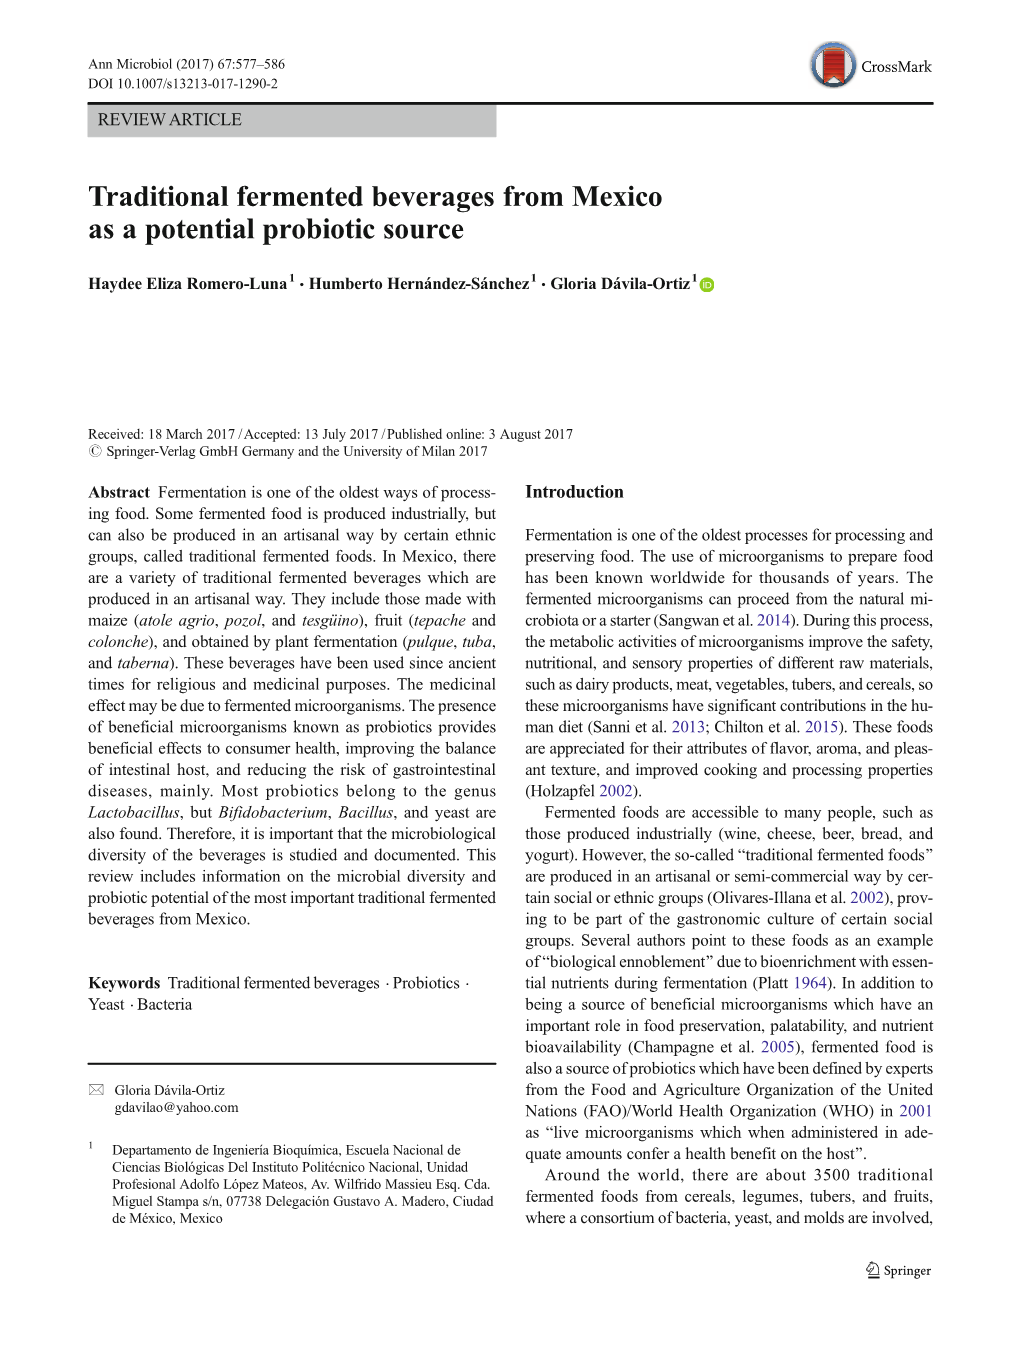 Traditional Fermented Beverages from Mexico As a Potential Probiotic Source